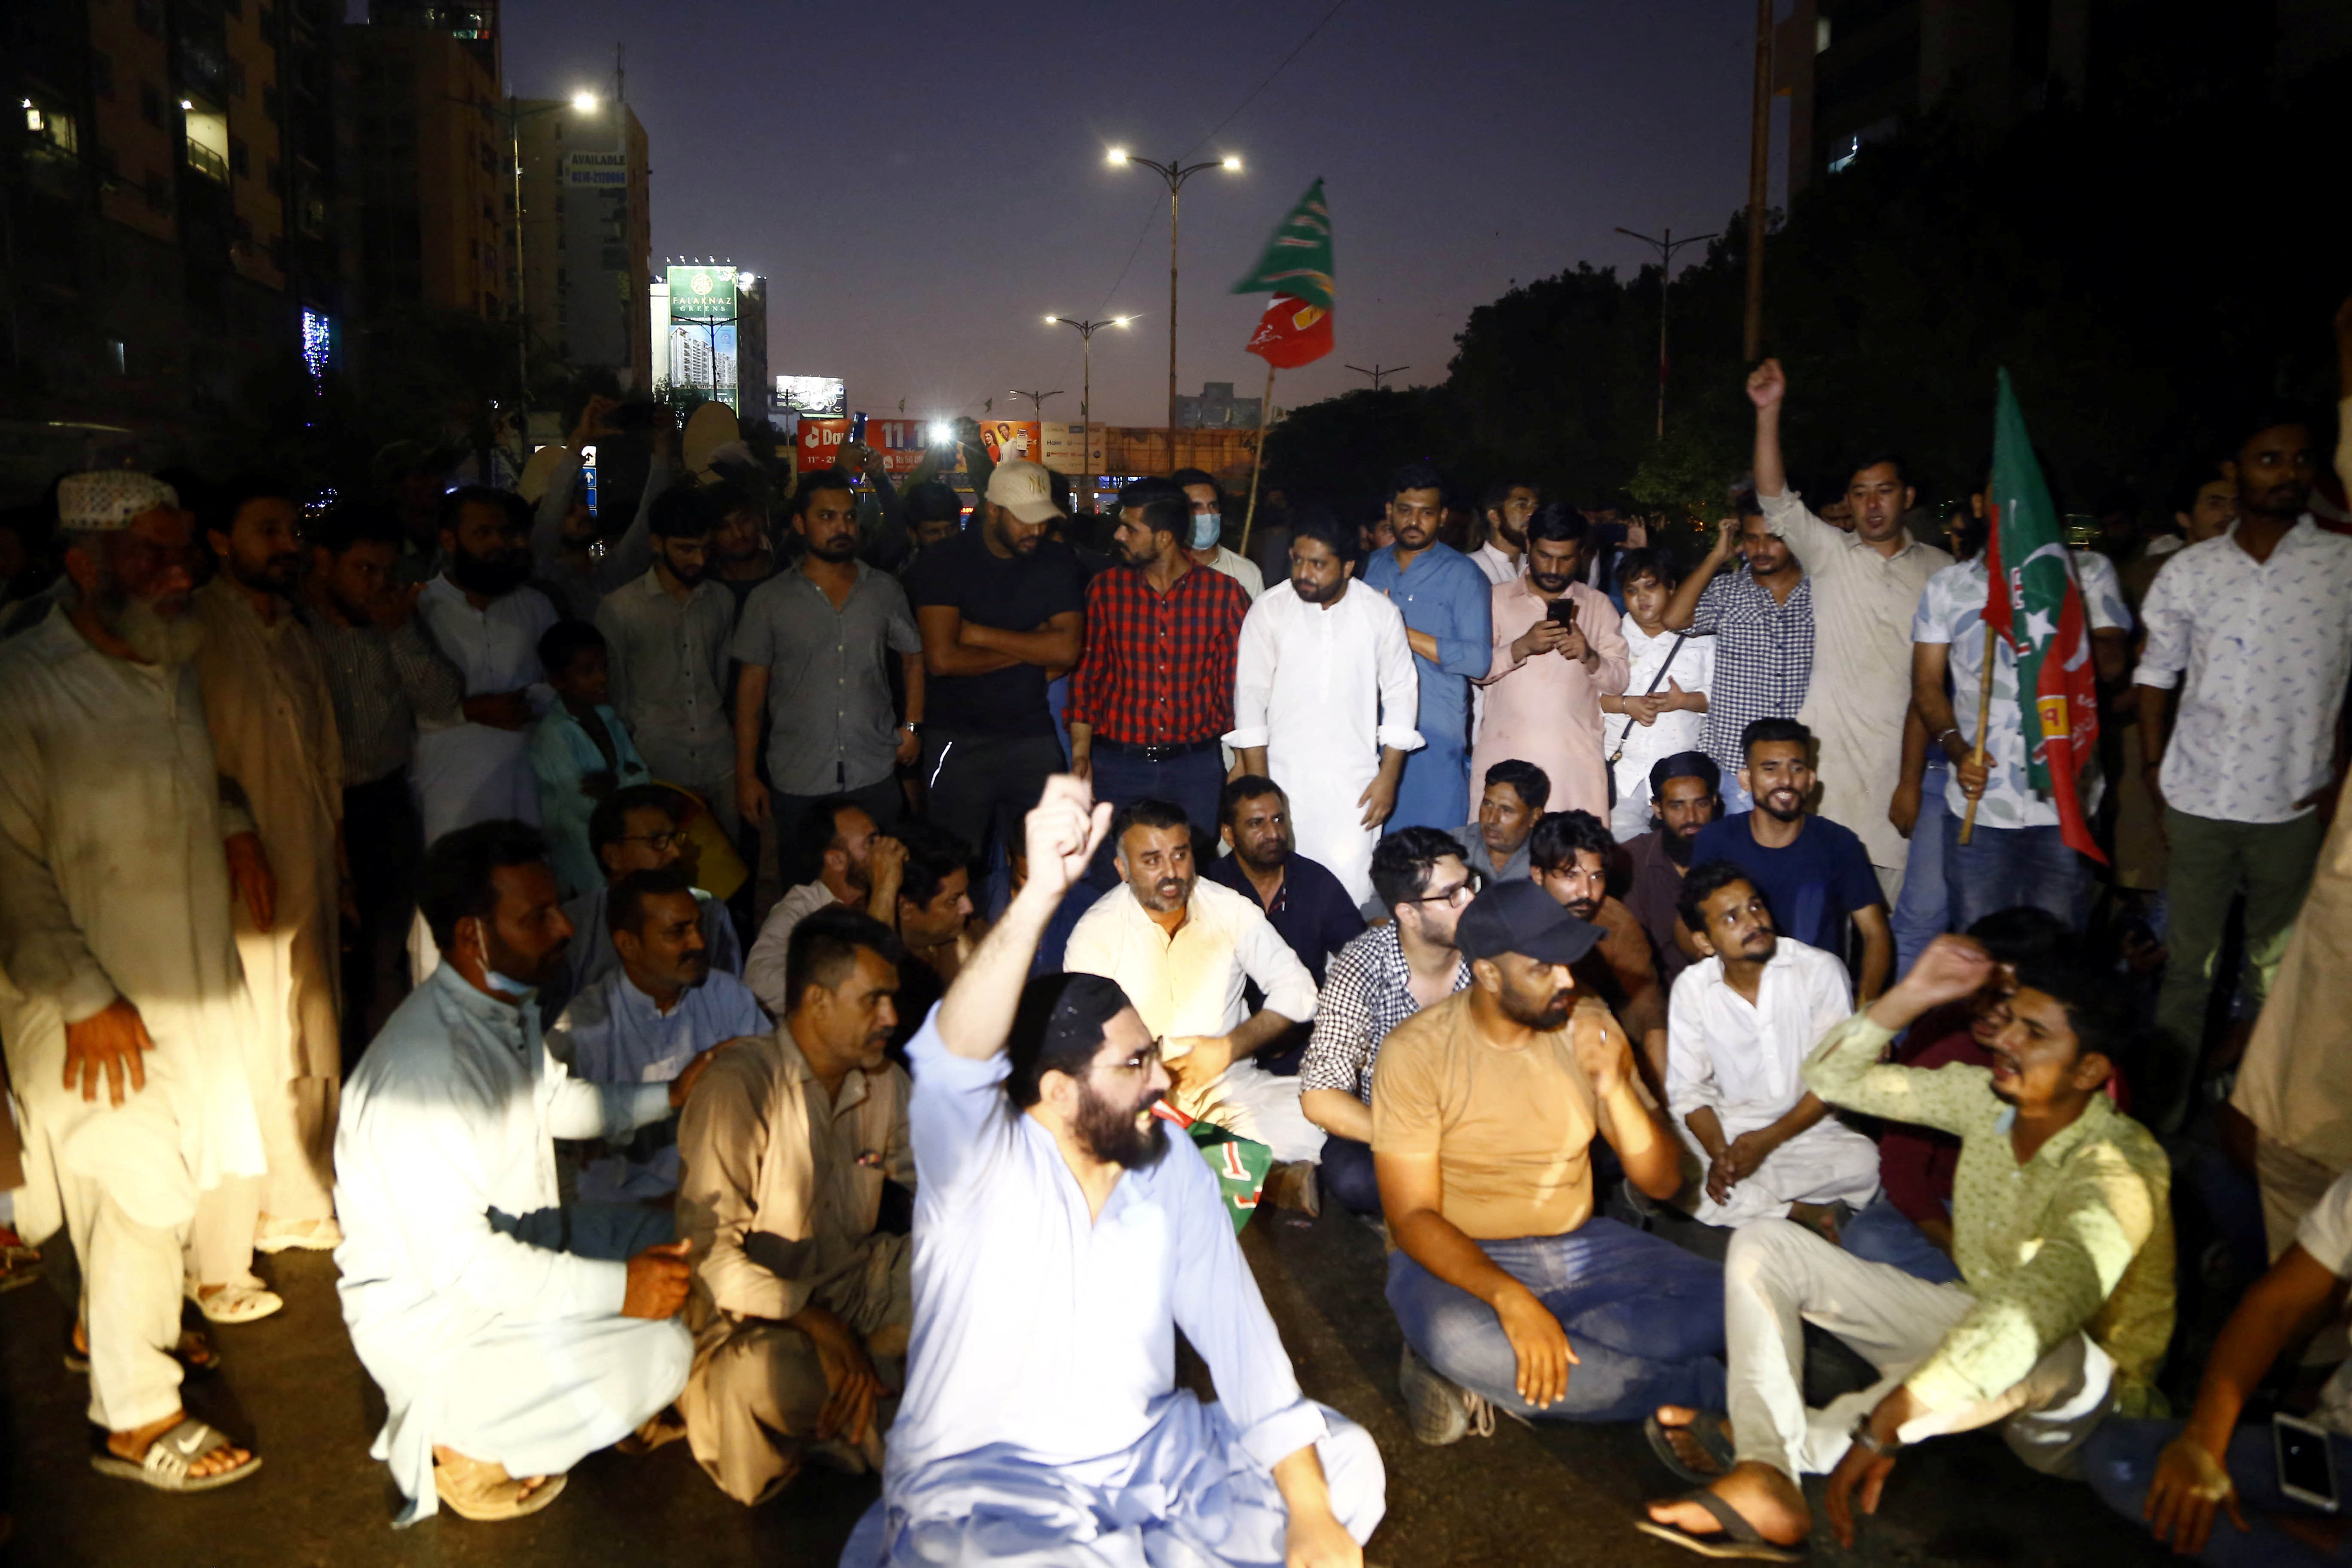 Supporters of Pakistan former Prime Minister Imran Khan, protest following the shooting incident on his long march in Wazirabad, in Karachi,